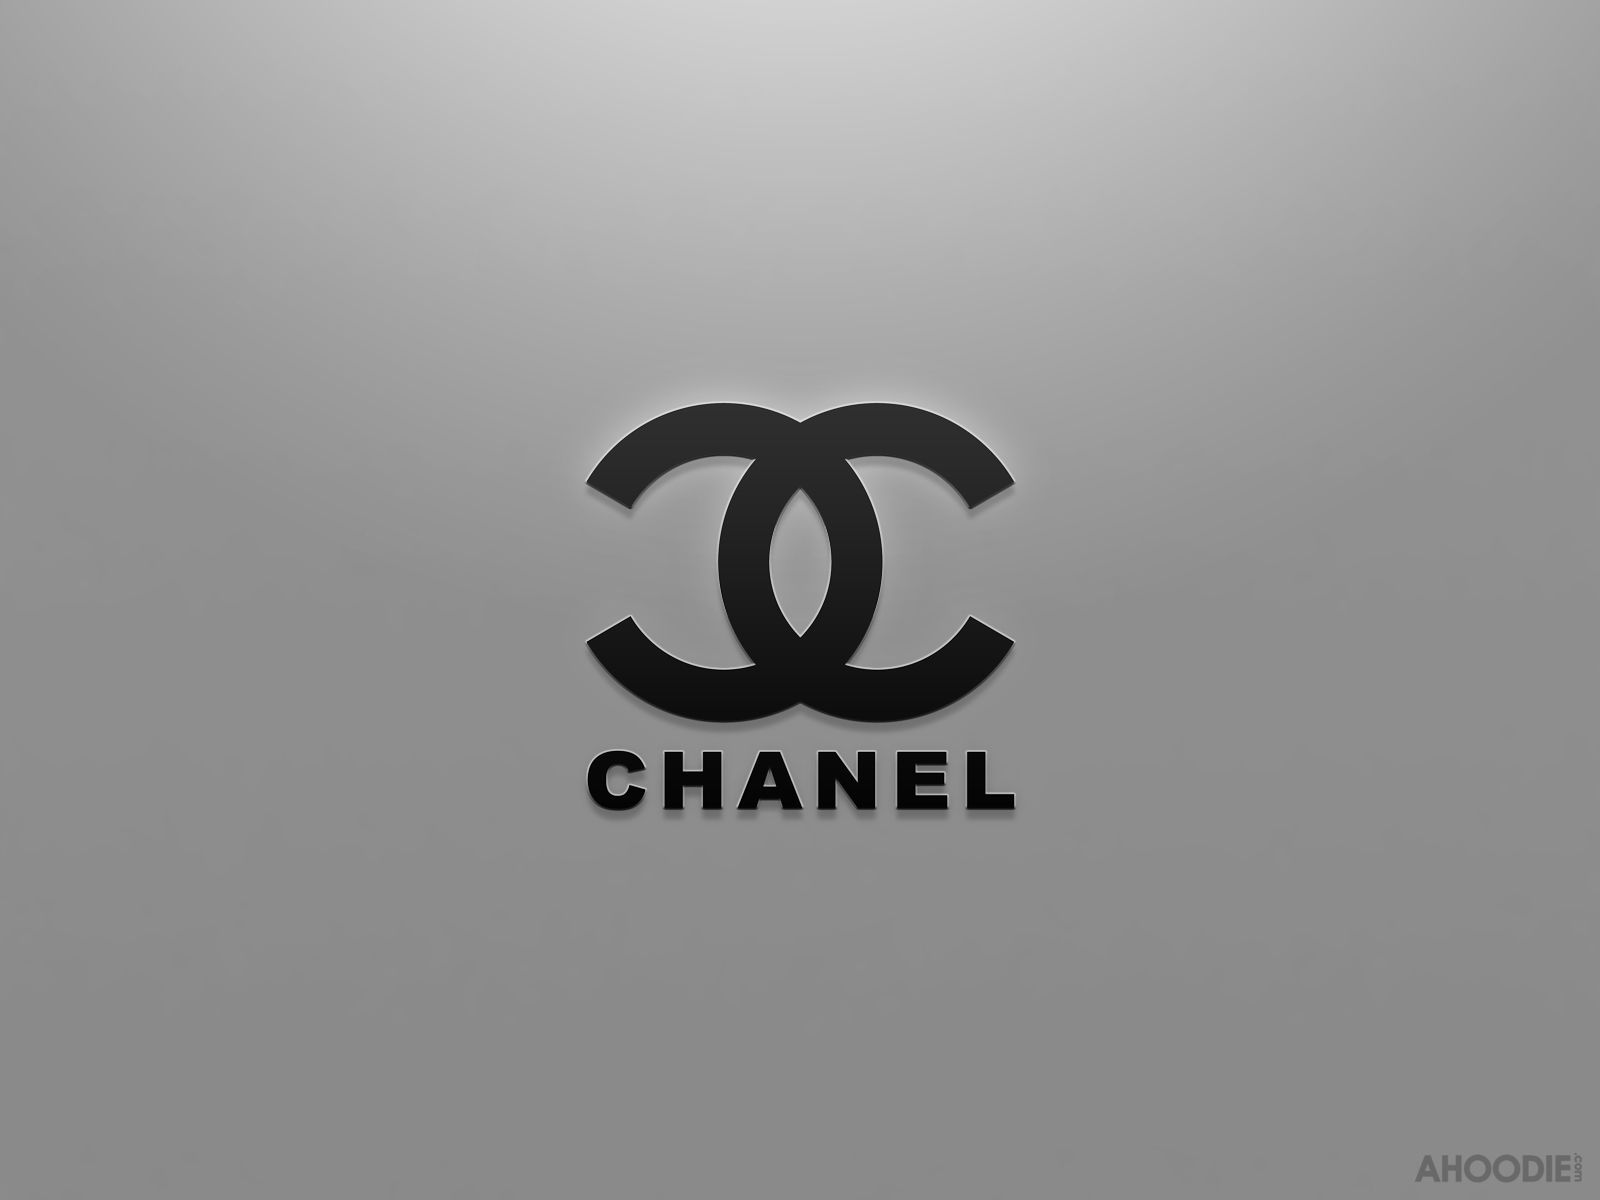 Chanel Wallpapers AHOODIE - Brand wallpapers